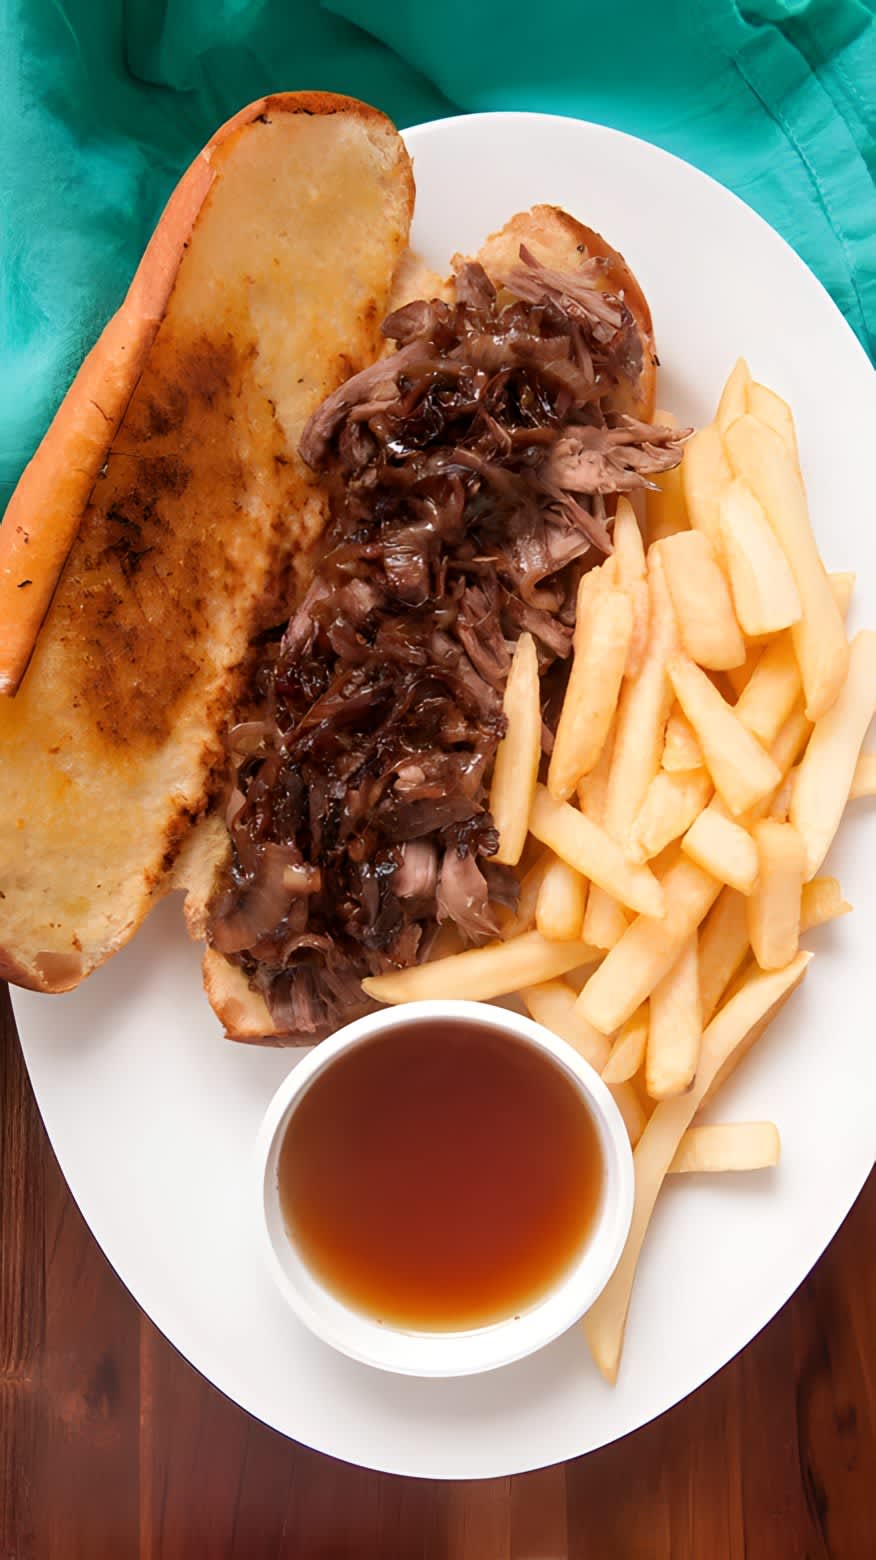 French dip sandwich on a plate with fries and dipping jus